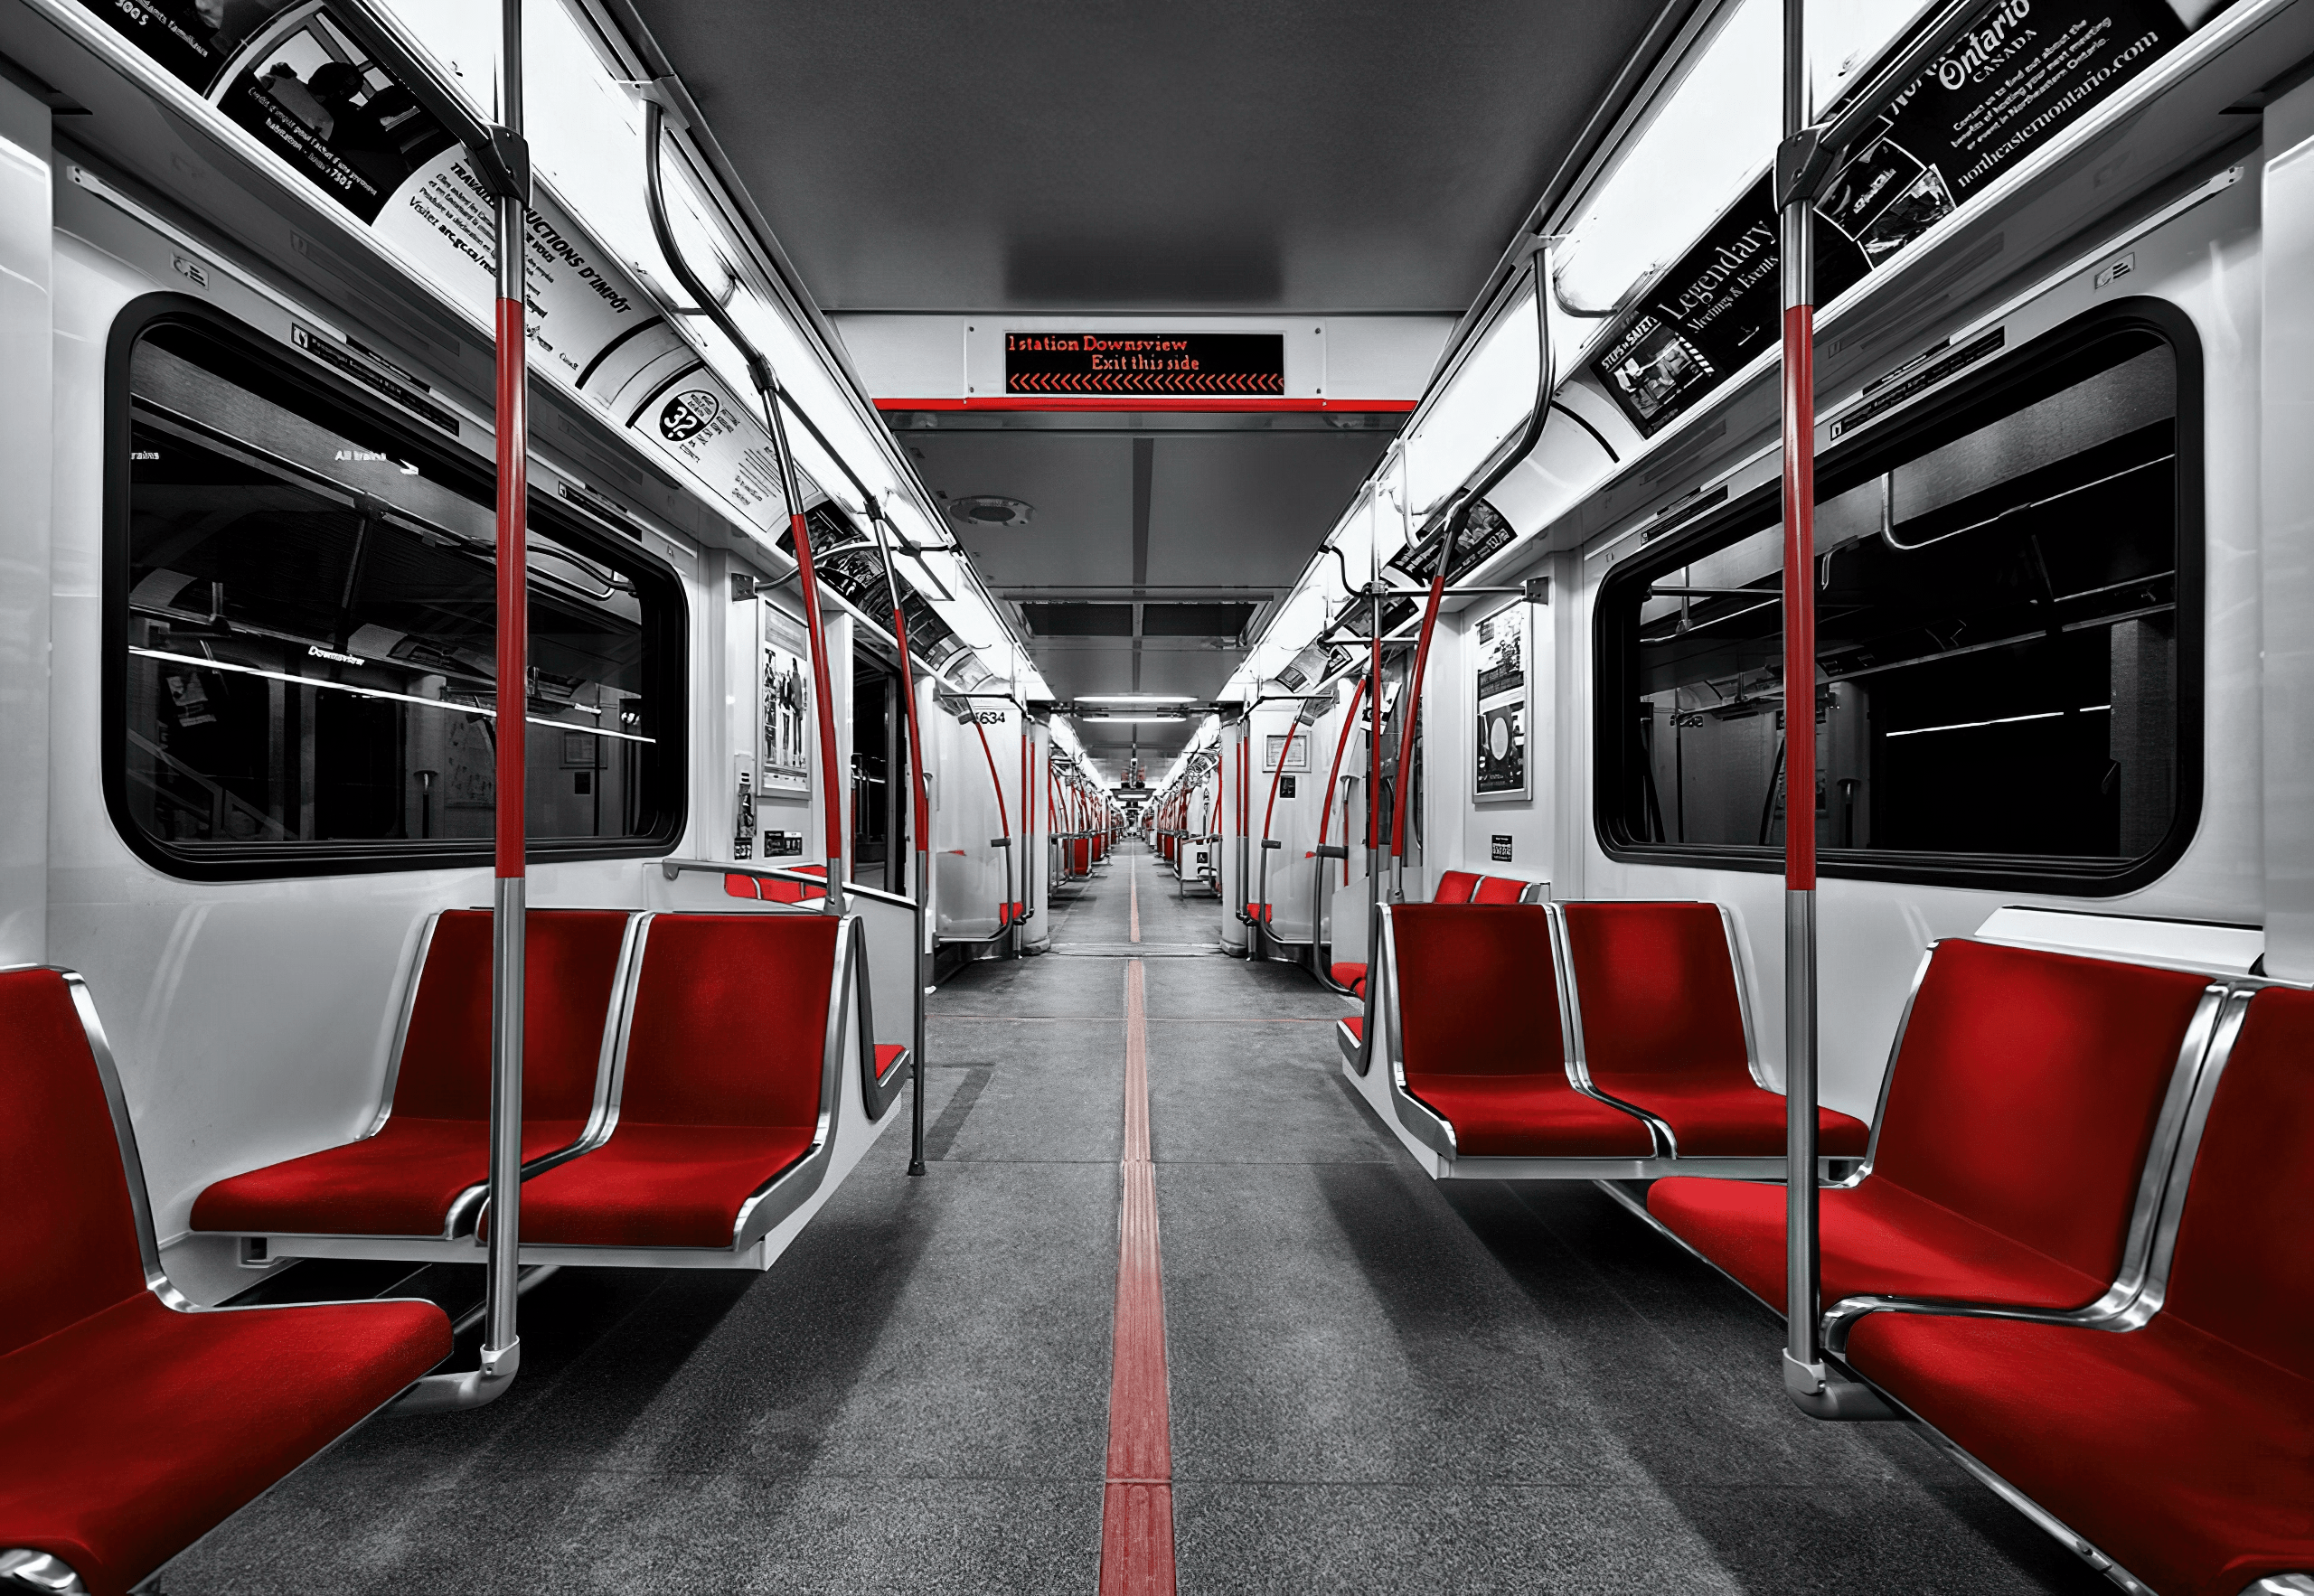 General 2560x1766 subway photography selective coloring low saturation red Toronto